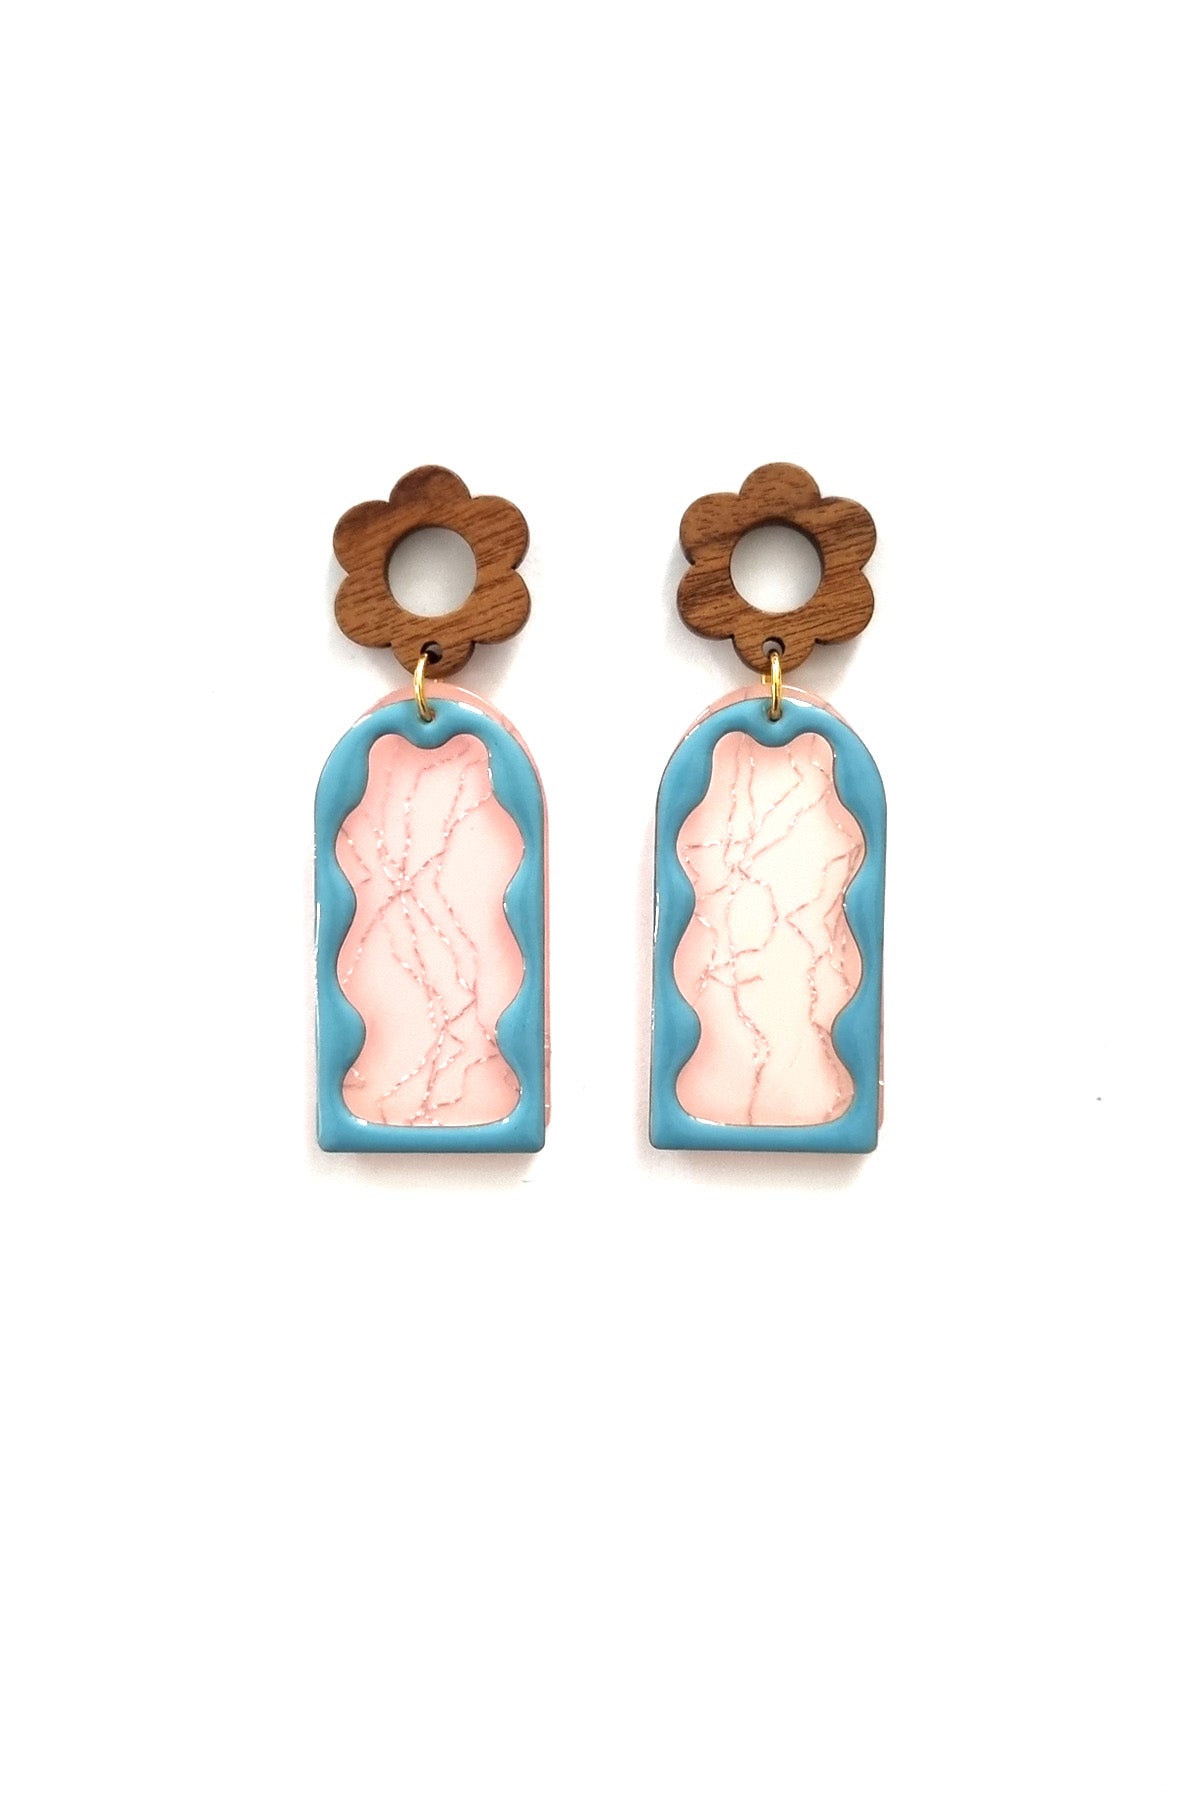 A pair of stud dangle earrings lay against a white background. They feature a wooden flower stud top followed by a pink acrylic arch with a silver thread detail. On top sits an enamel wavy arch frame in blue.